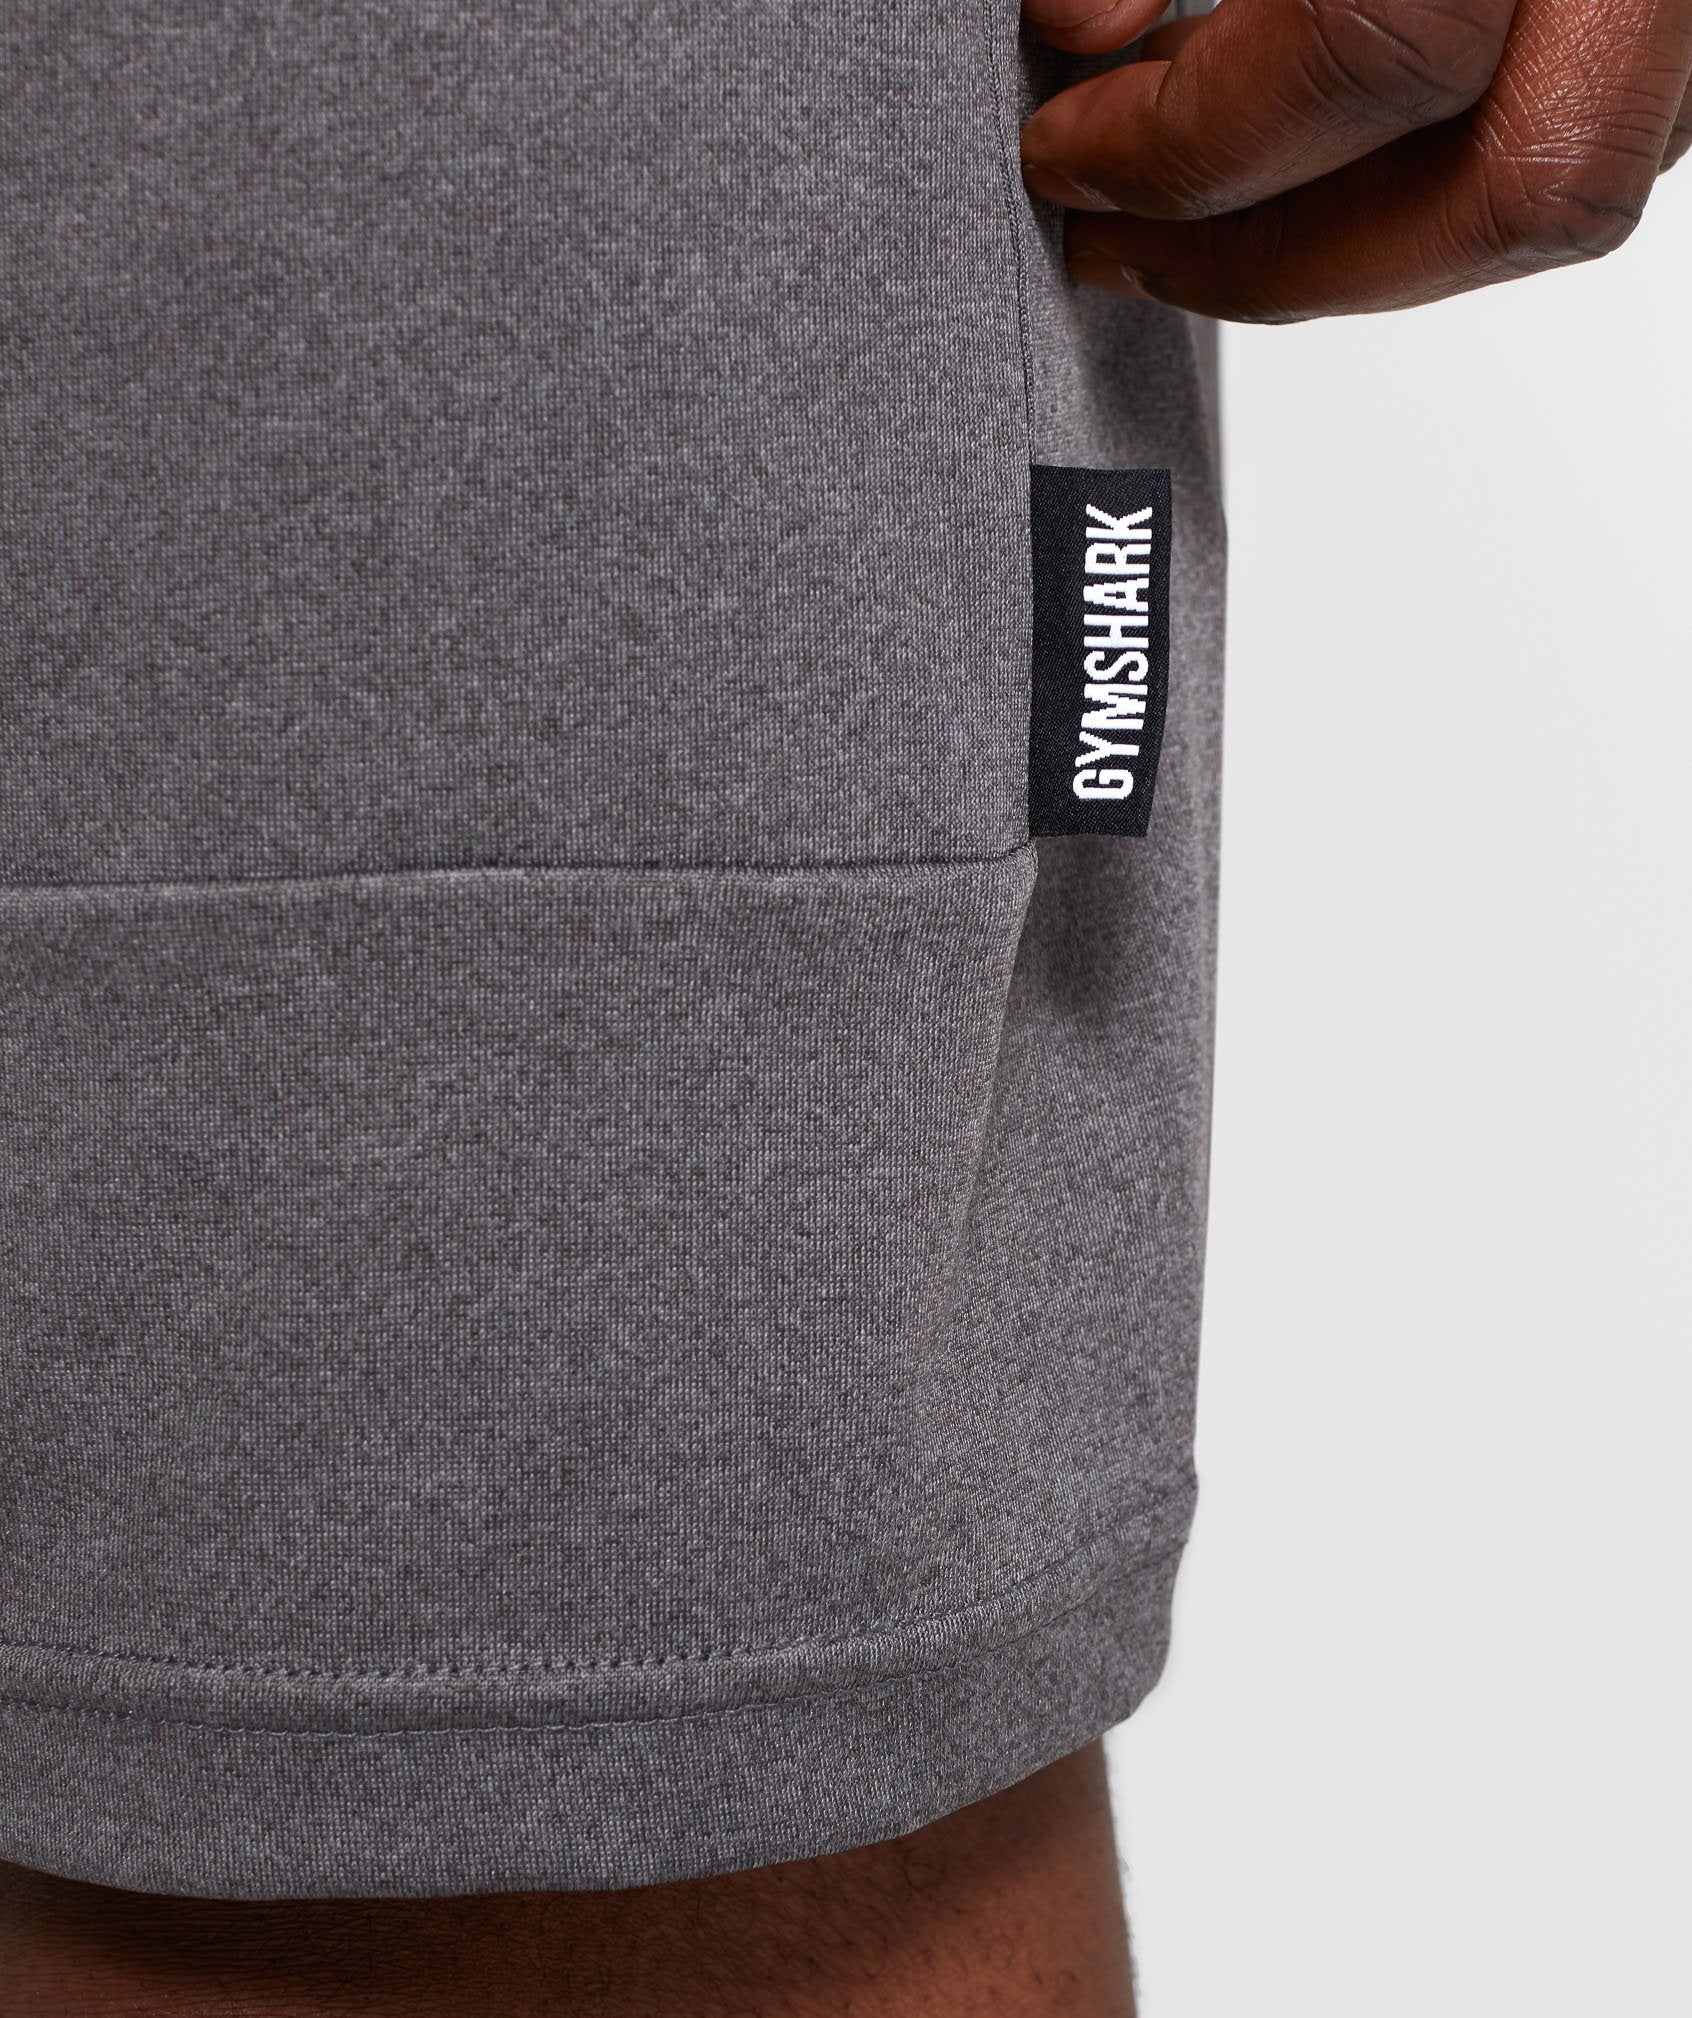 Element Shorts in Grey - view 6